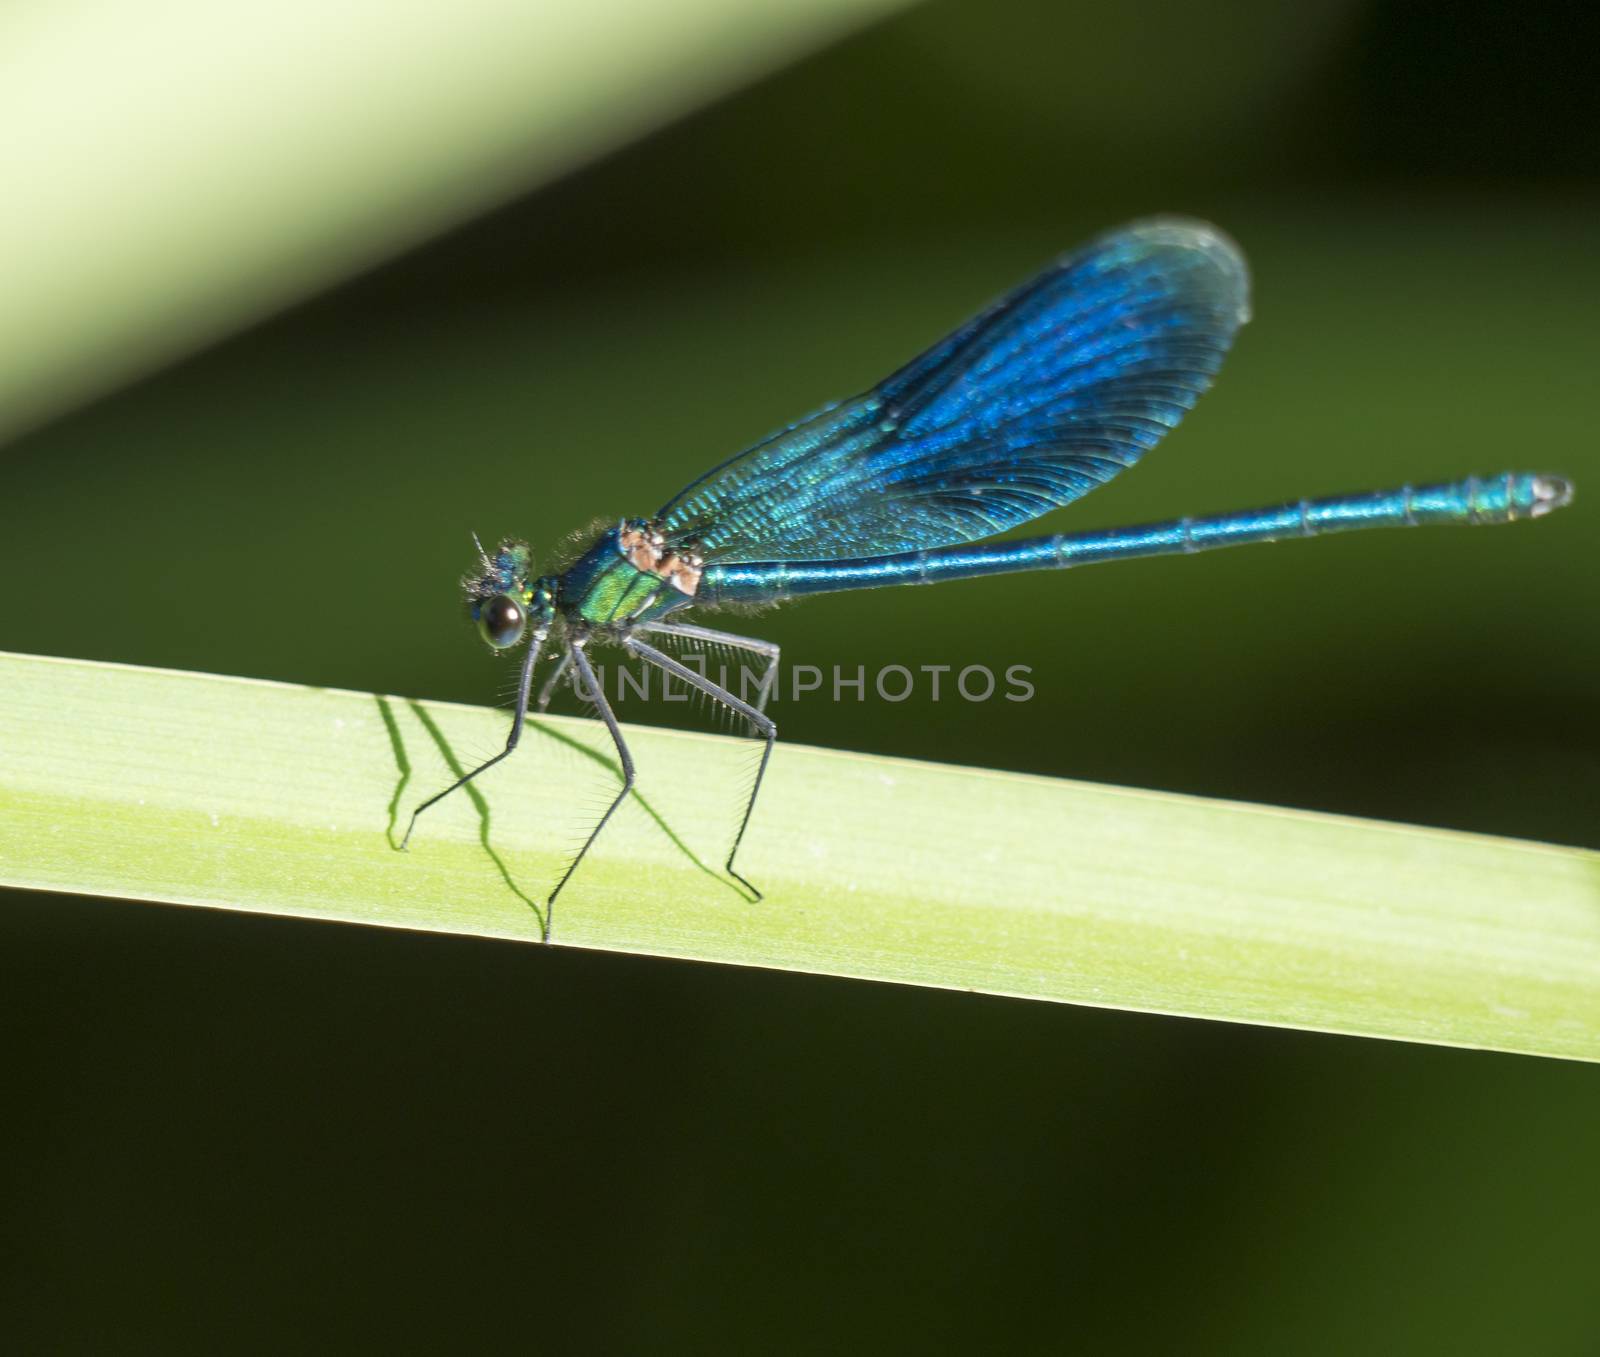 Macro of male Banded Demoiselle, Calopteryx splendens resting on a green leaf. Damselfly of family Calopterygidae. Selective focus, green bokeh background, copy space.